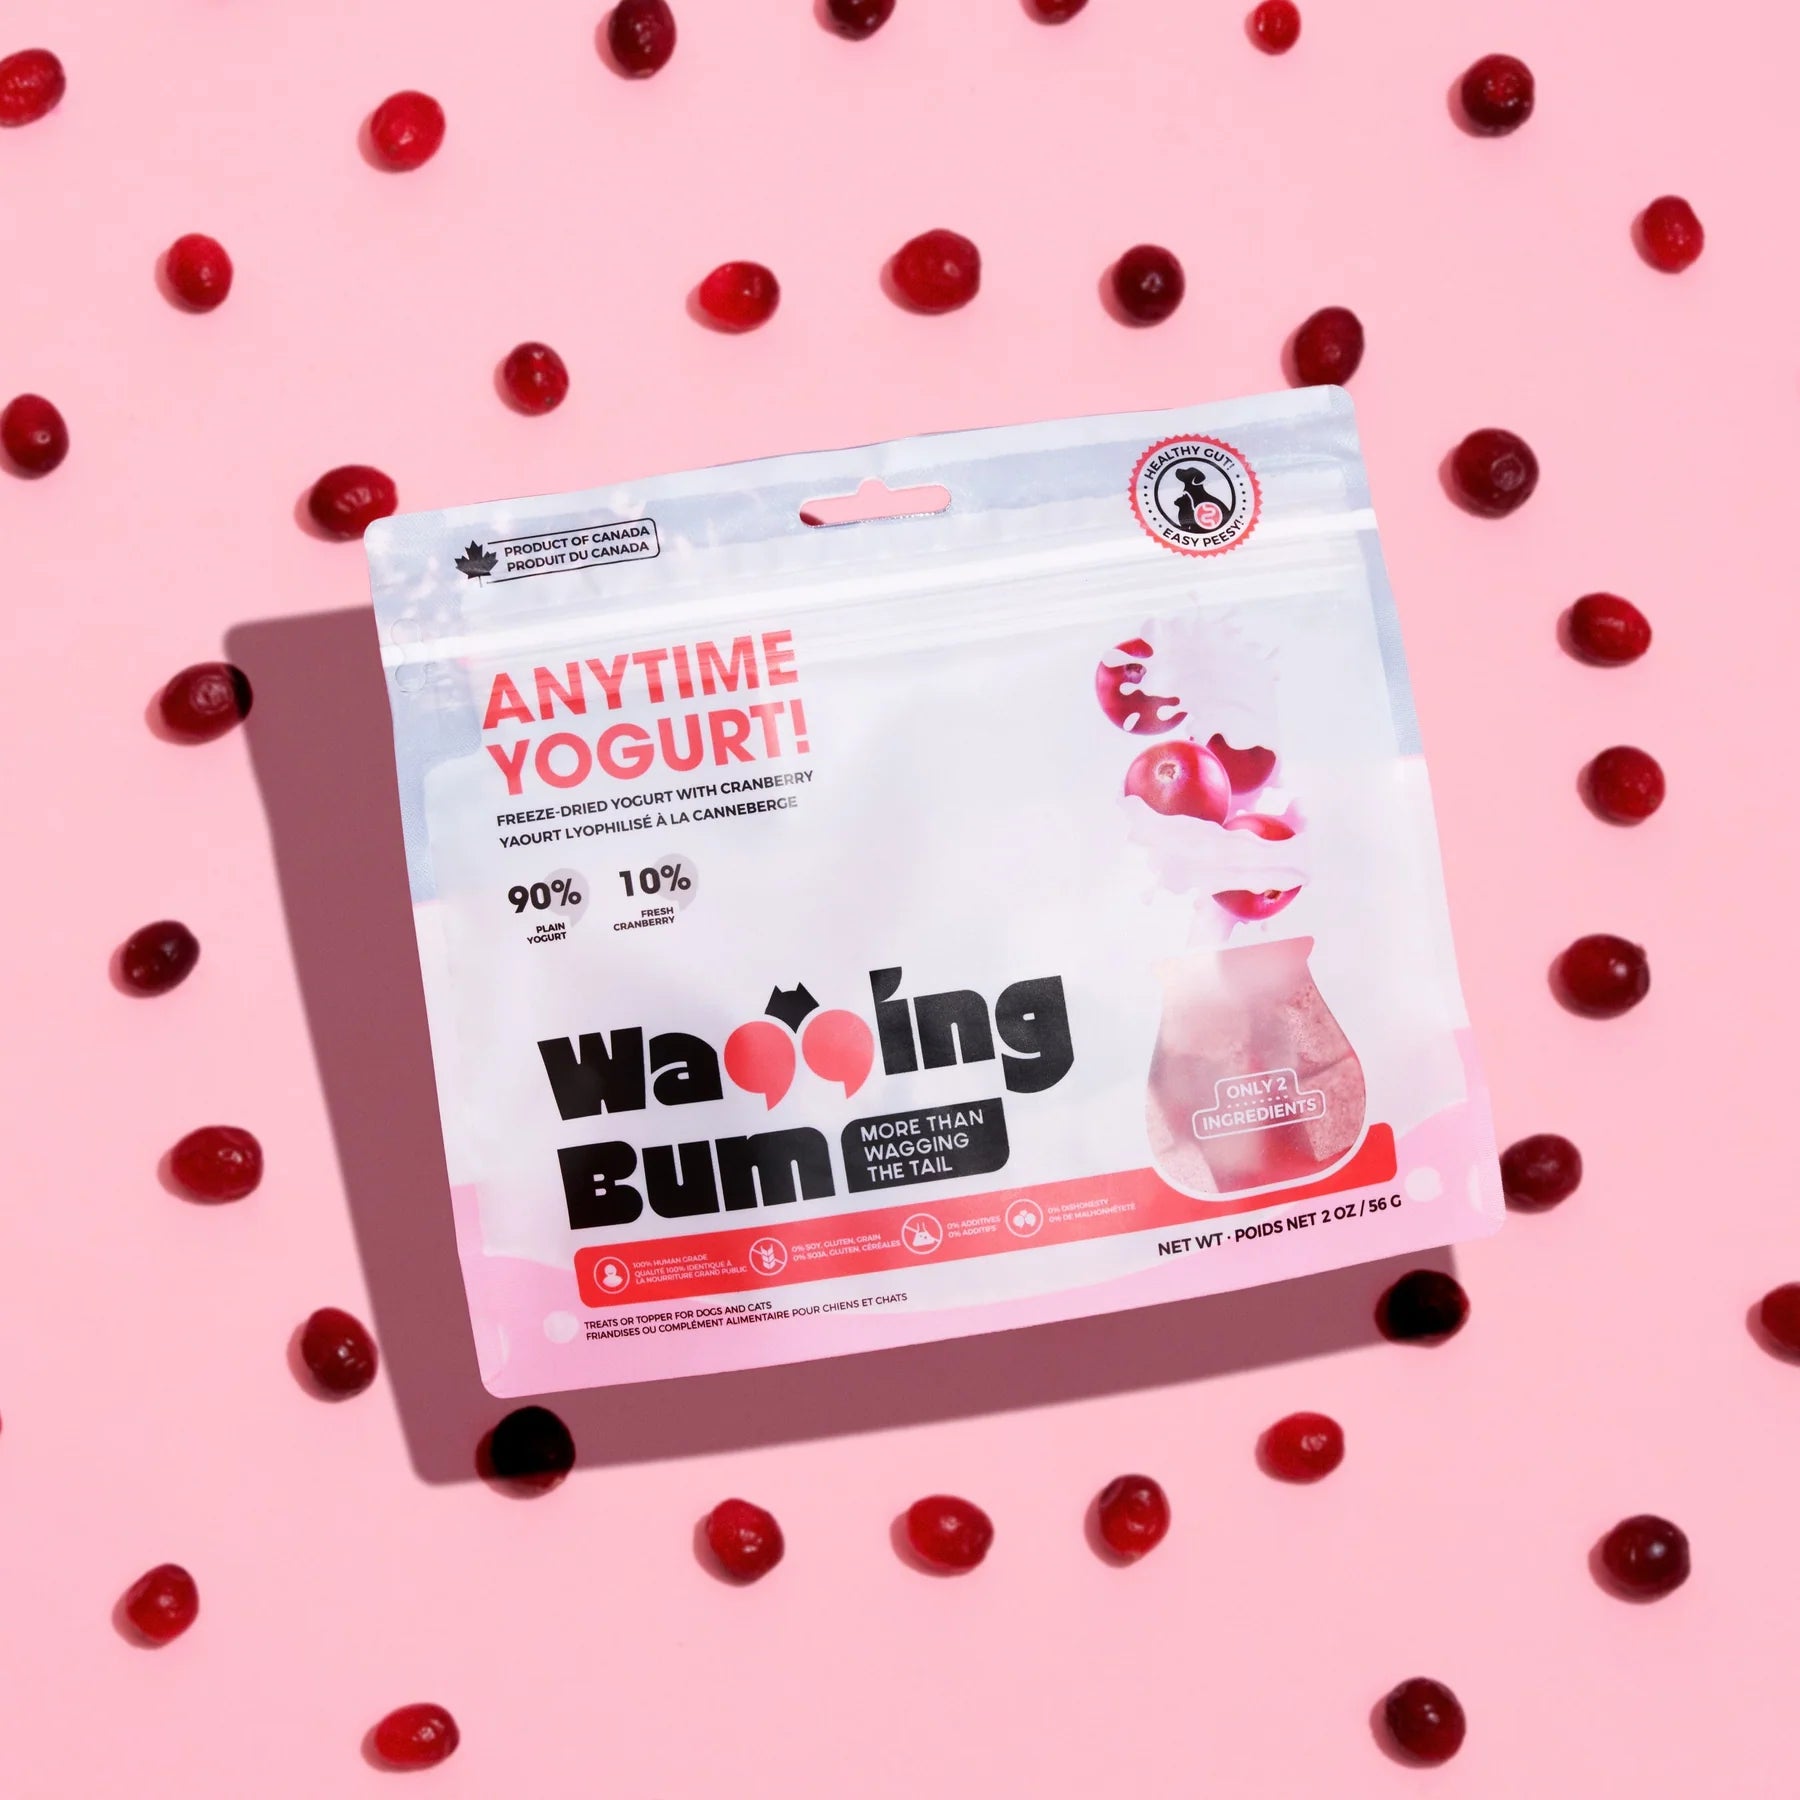 Wagging Bum - Anytime Yogurt! Freeze Dried Yogurt with Cranberry (For Dogs)